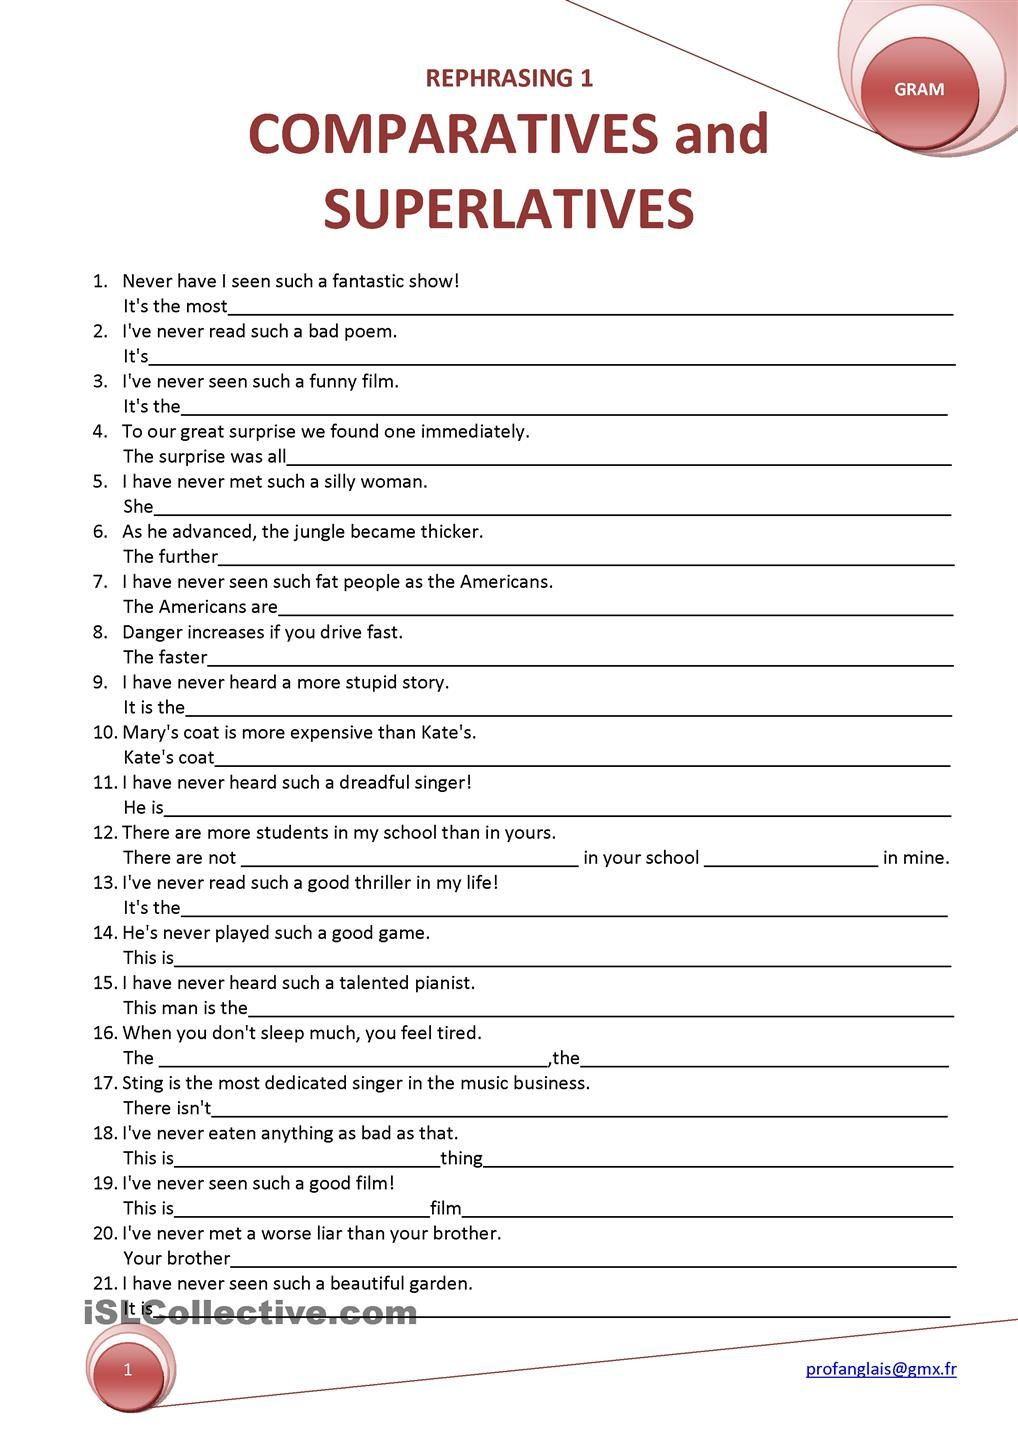 Rephrasing 1 Comparatives And Superlatives | School | English | Comparative Worksheets Printable